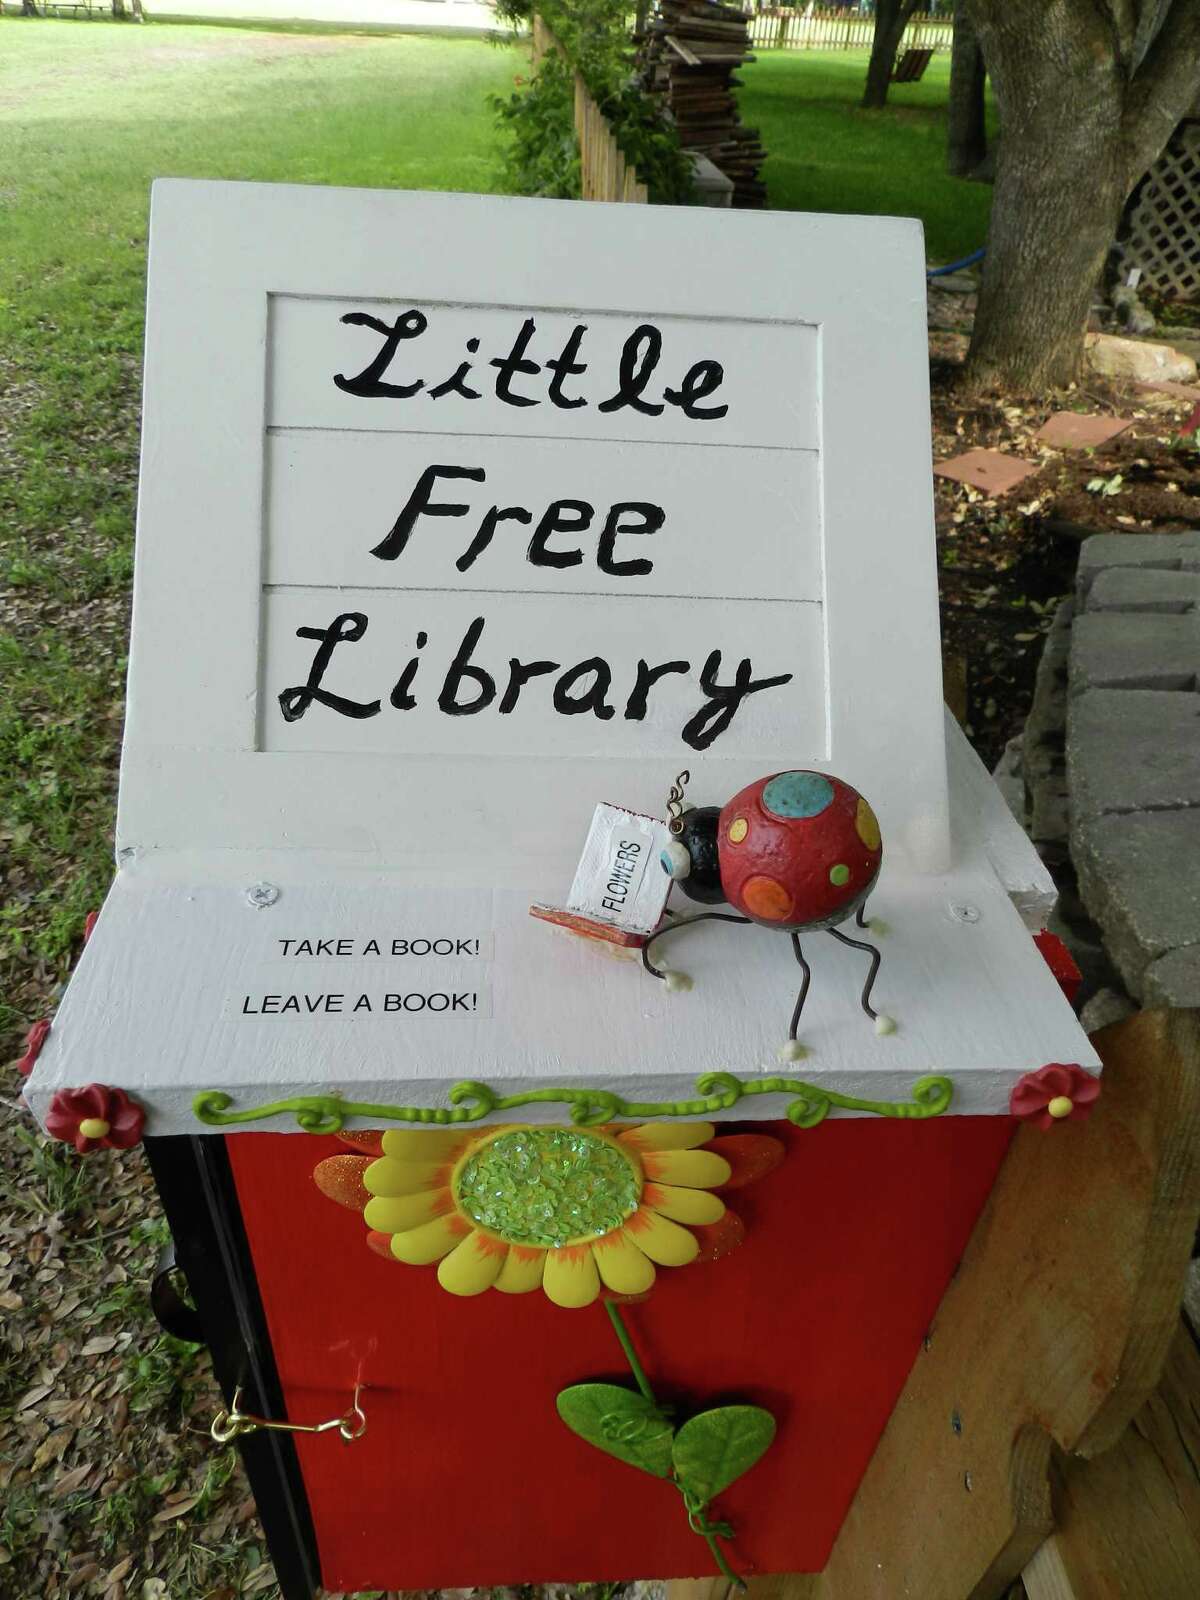 Christa Neumann and her husband, Mark Gibson, who live in Pflugerville, were quick converts to the Little Free Library concept. Here s how it works: You take a sturdy, waterproof small structure, fill it with books, set it up outside, add a sign ( take a book, leave a book is popular) and watch what happens.